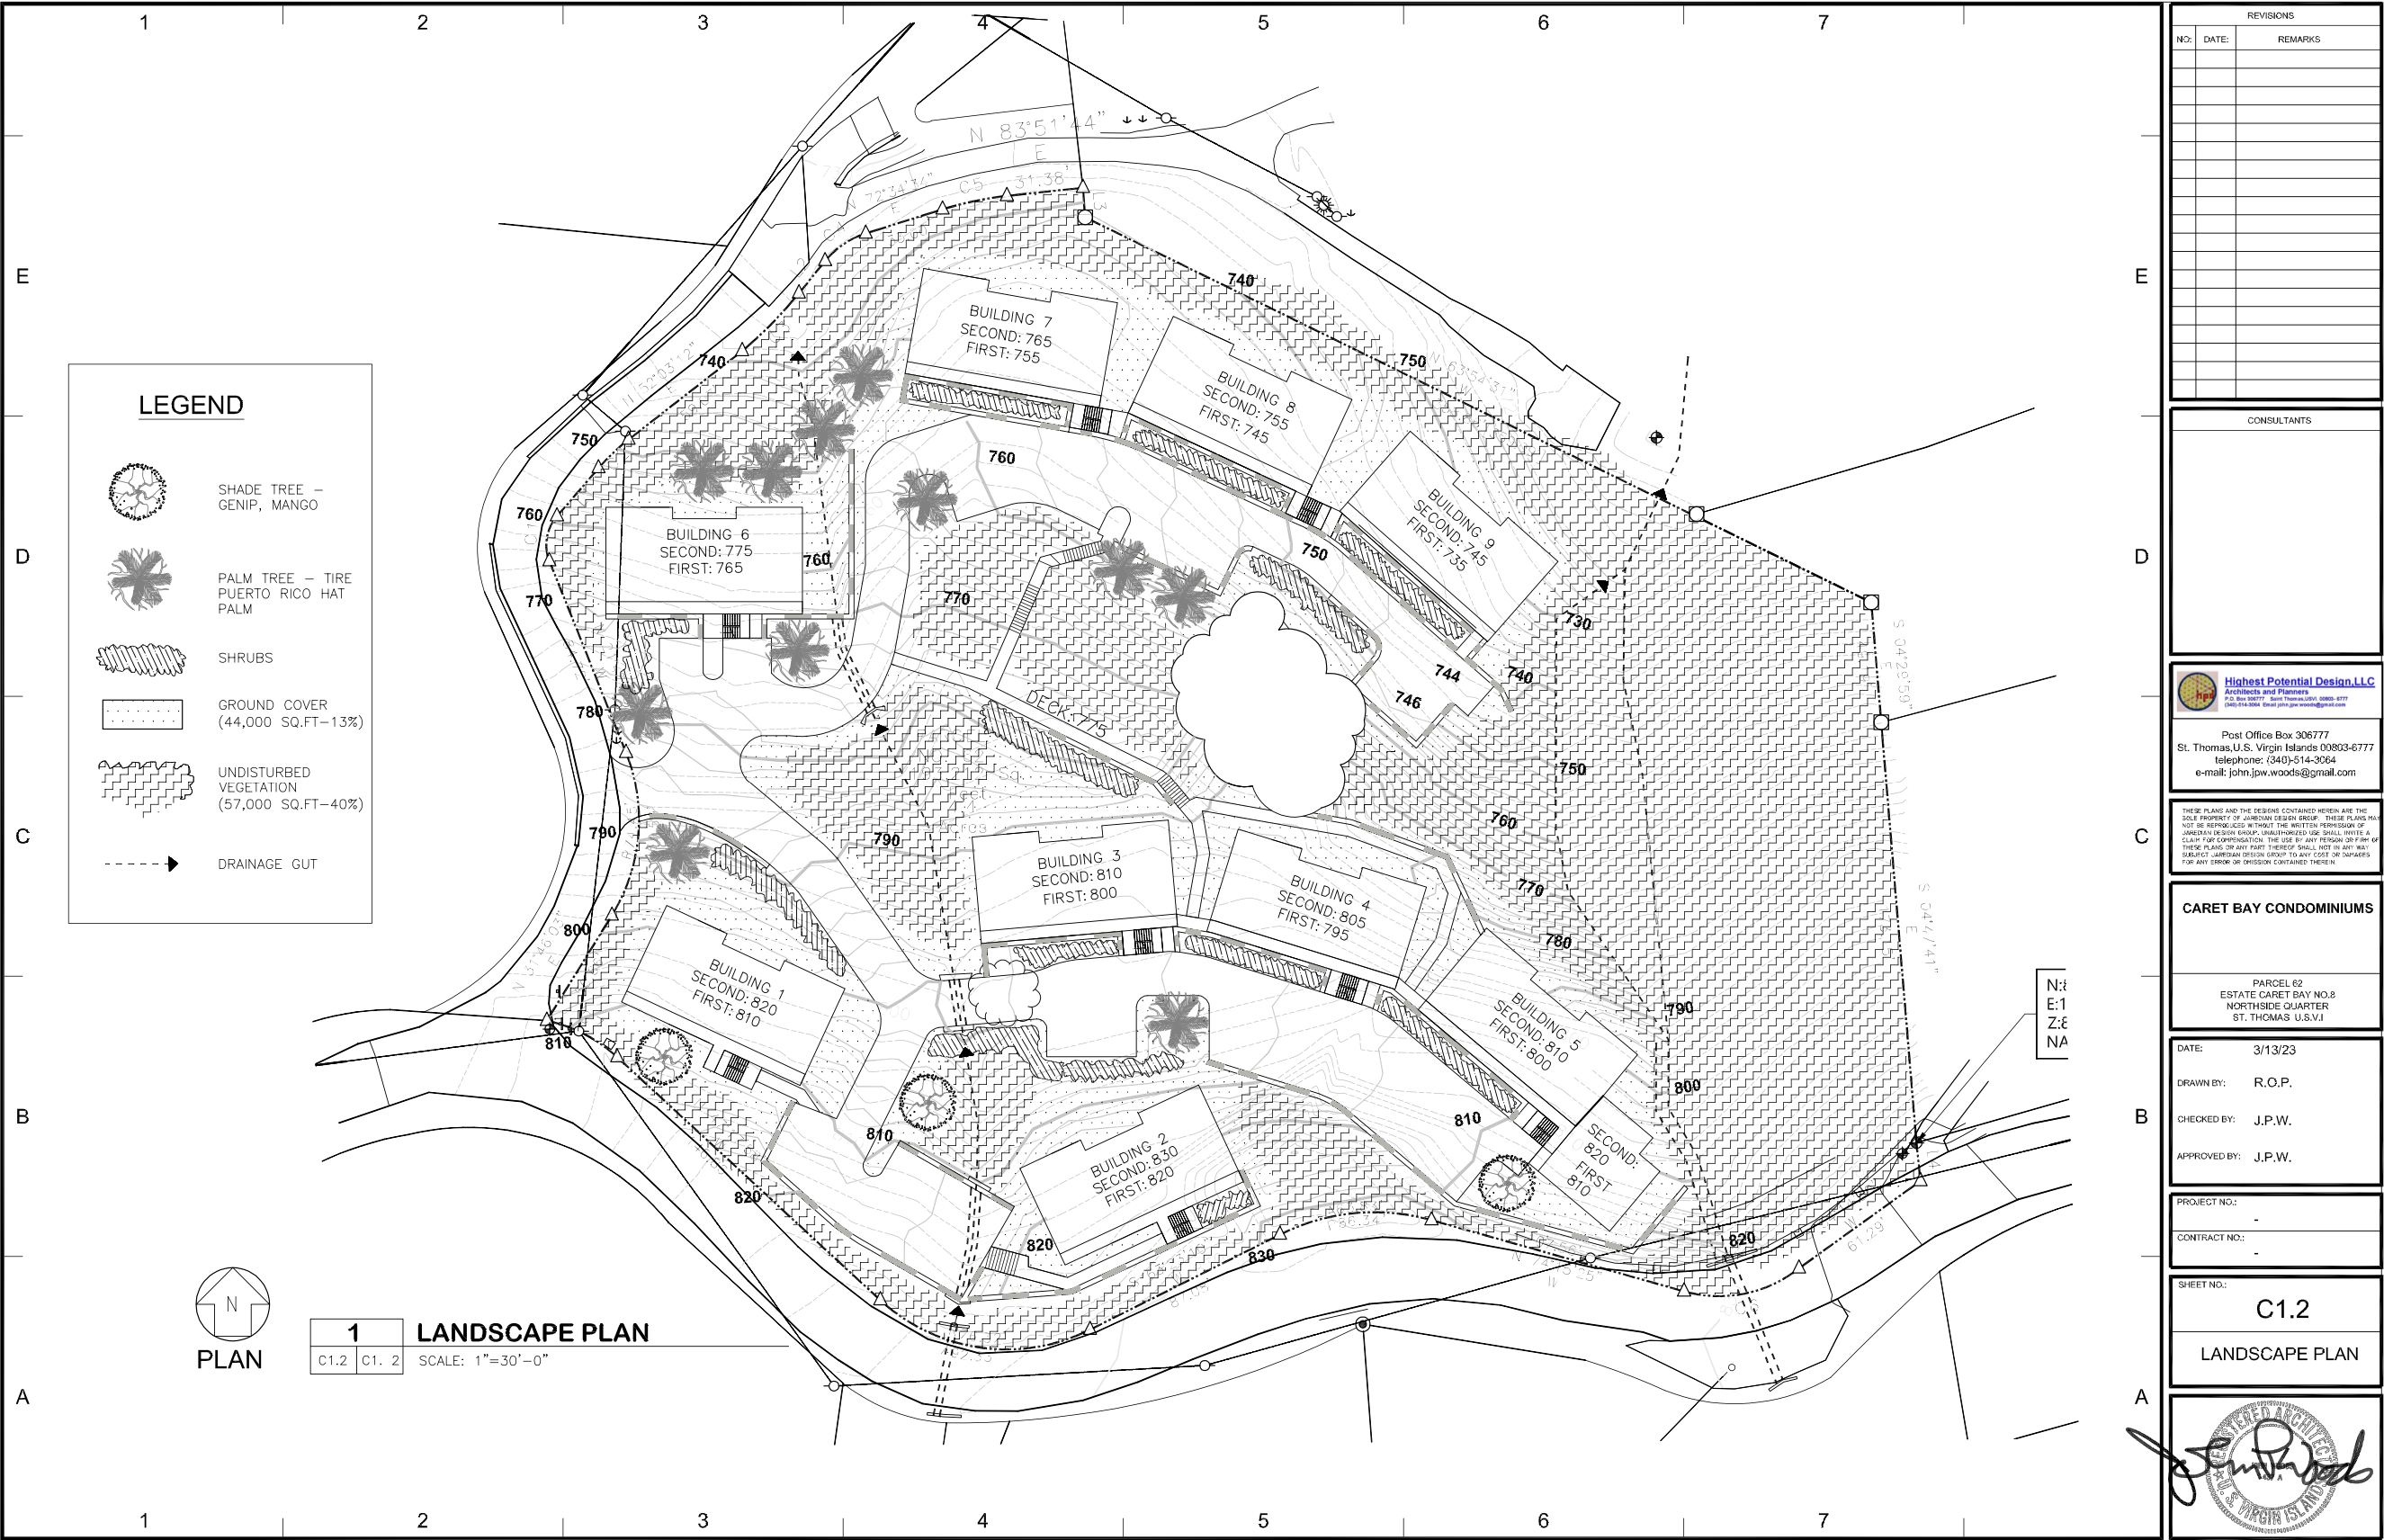 The site plan for a series of condos proposed for a 4.43 acre parcel in Estate Caret Bay on the Northside of St. Thomas. (Image courtesy DPNR)